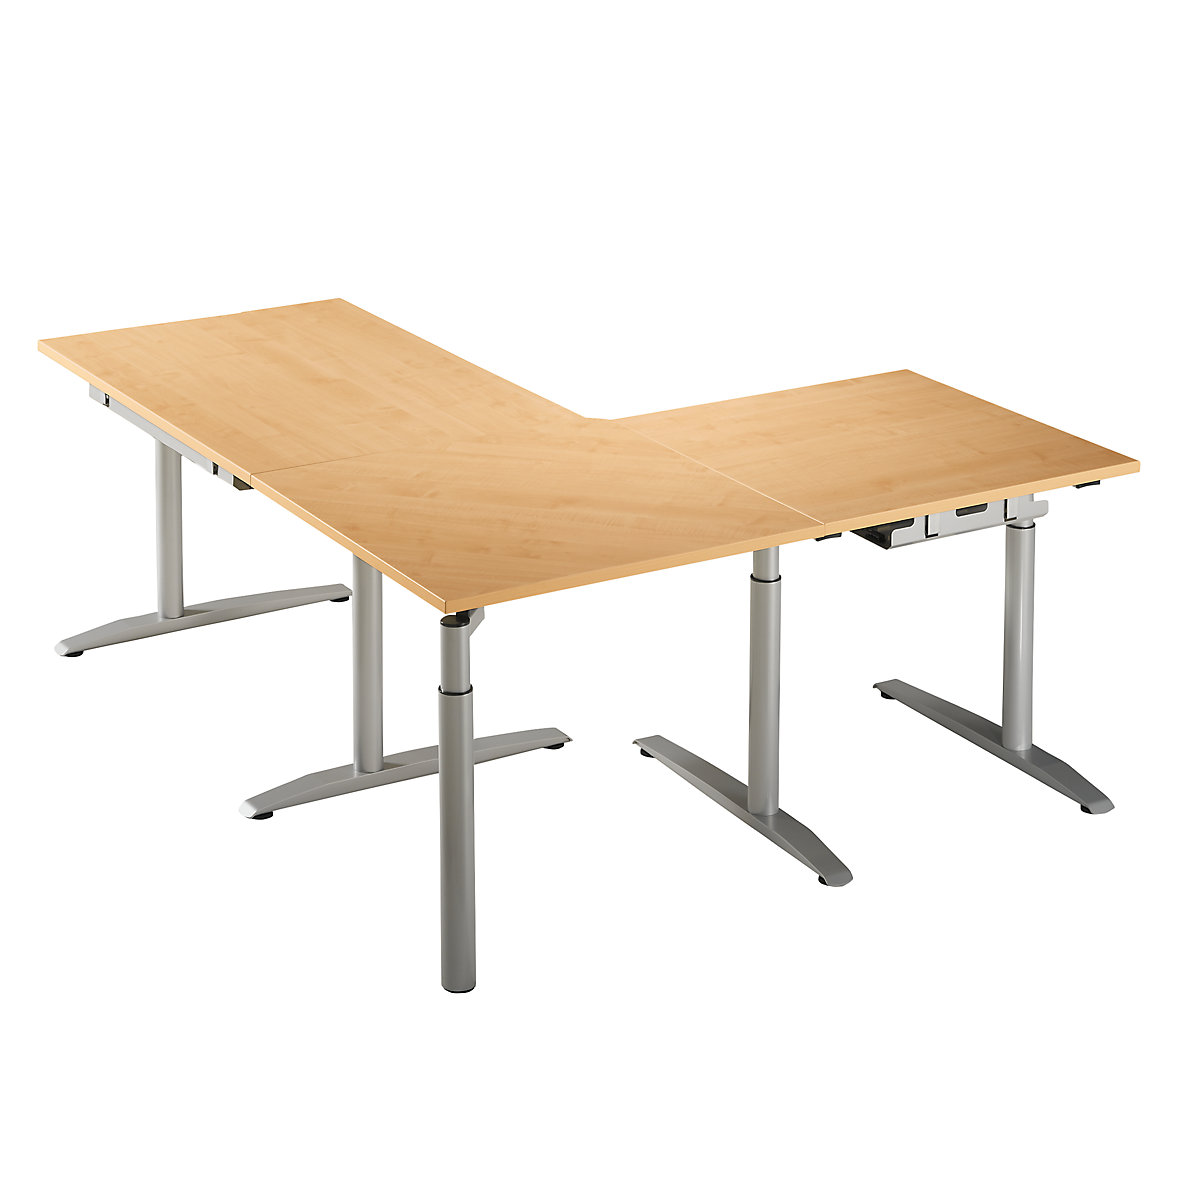 Linking top, height adjustable from 680 – 820 mm HANNA, 90°, with support leg, beech finish-6